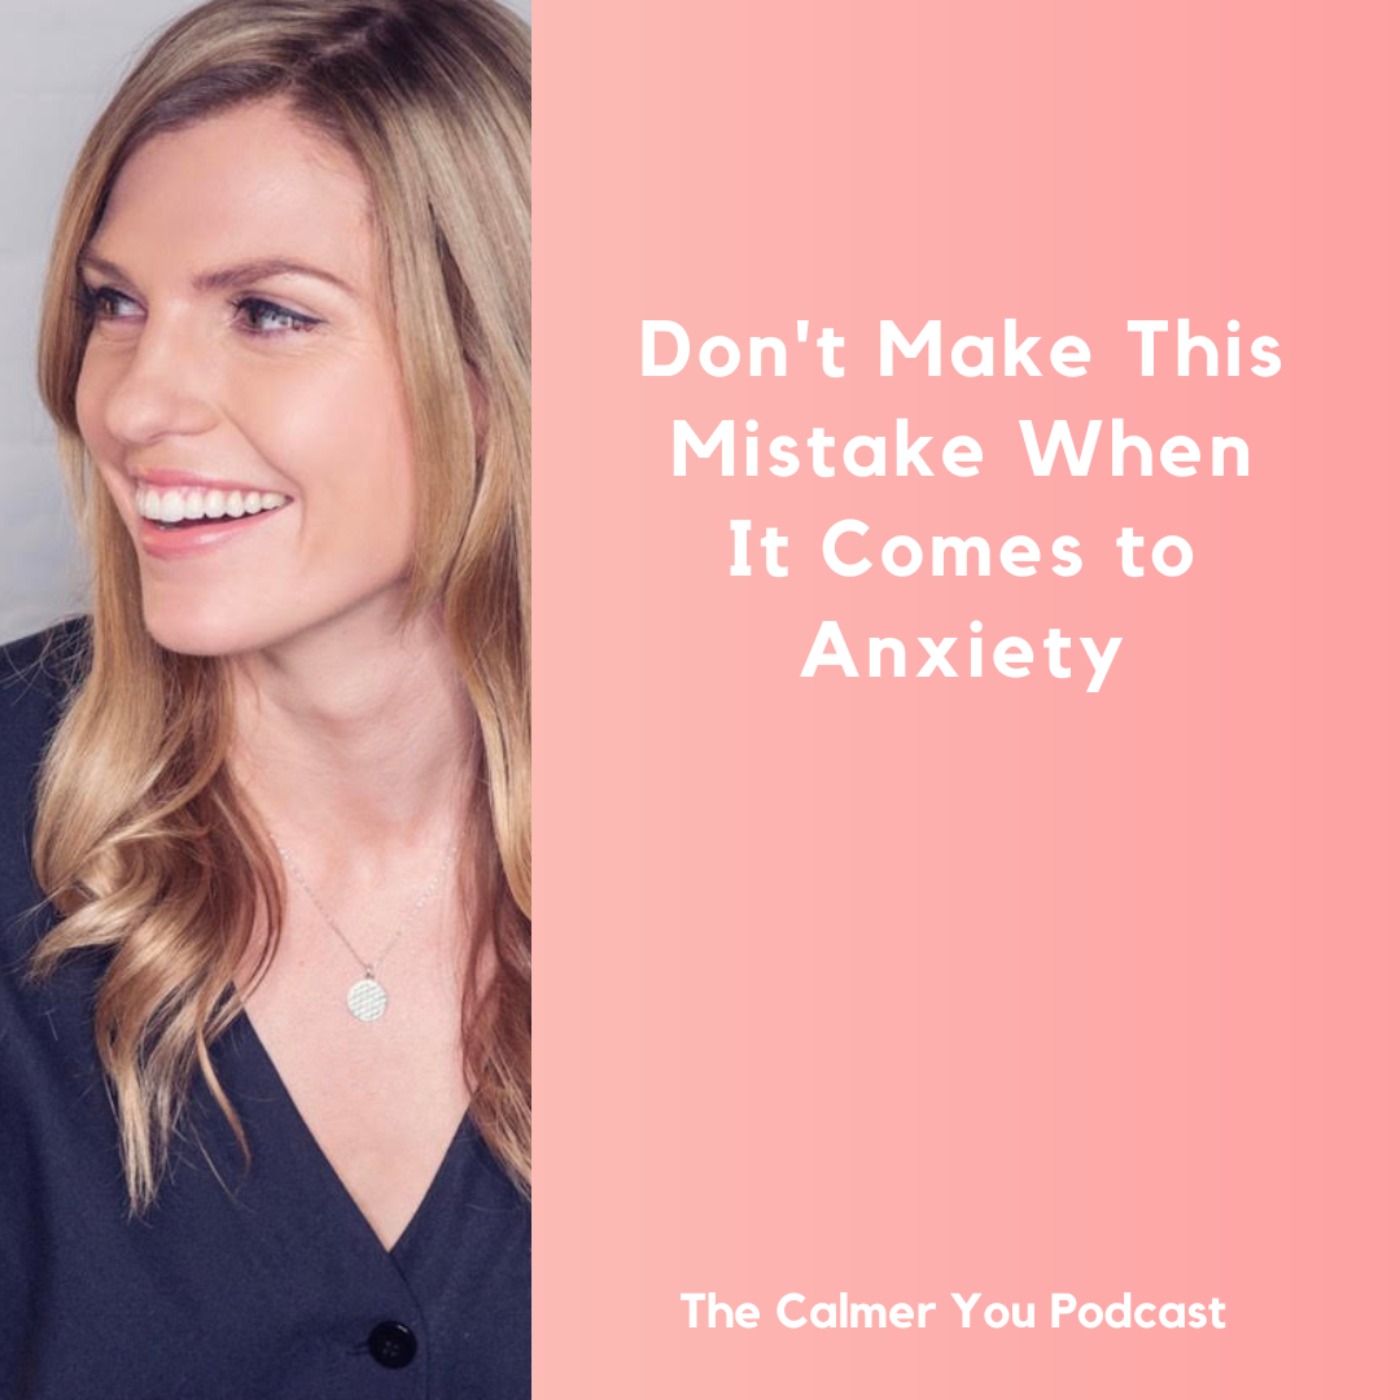 Ep 201. Don't Make This Mistake When It Comes to Anxiety